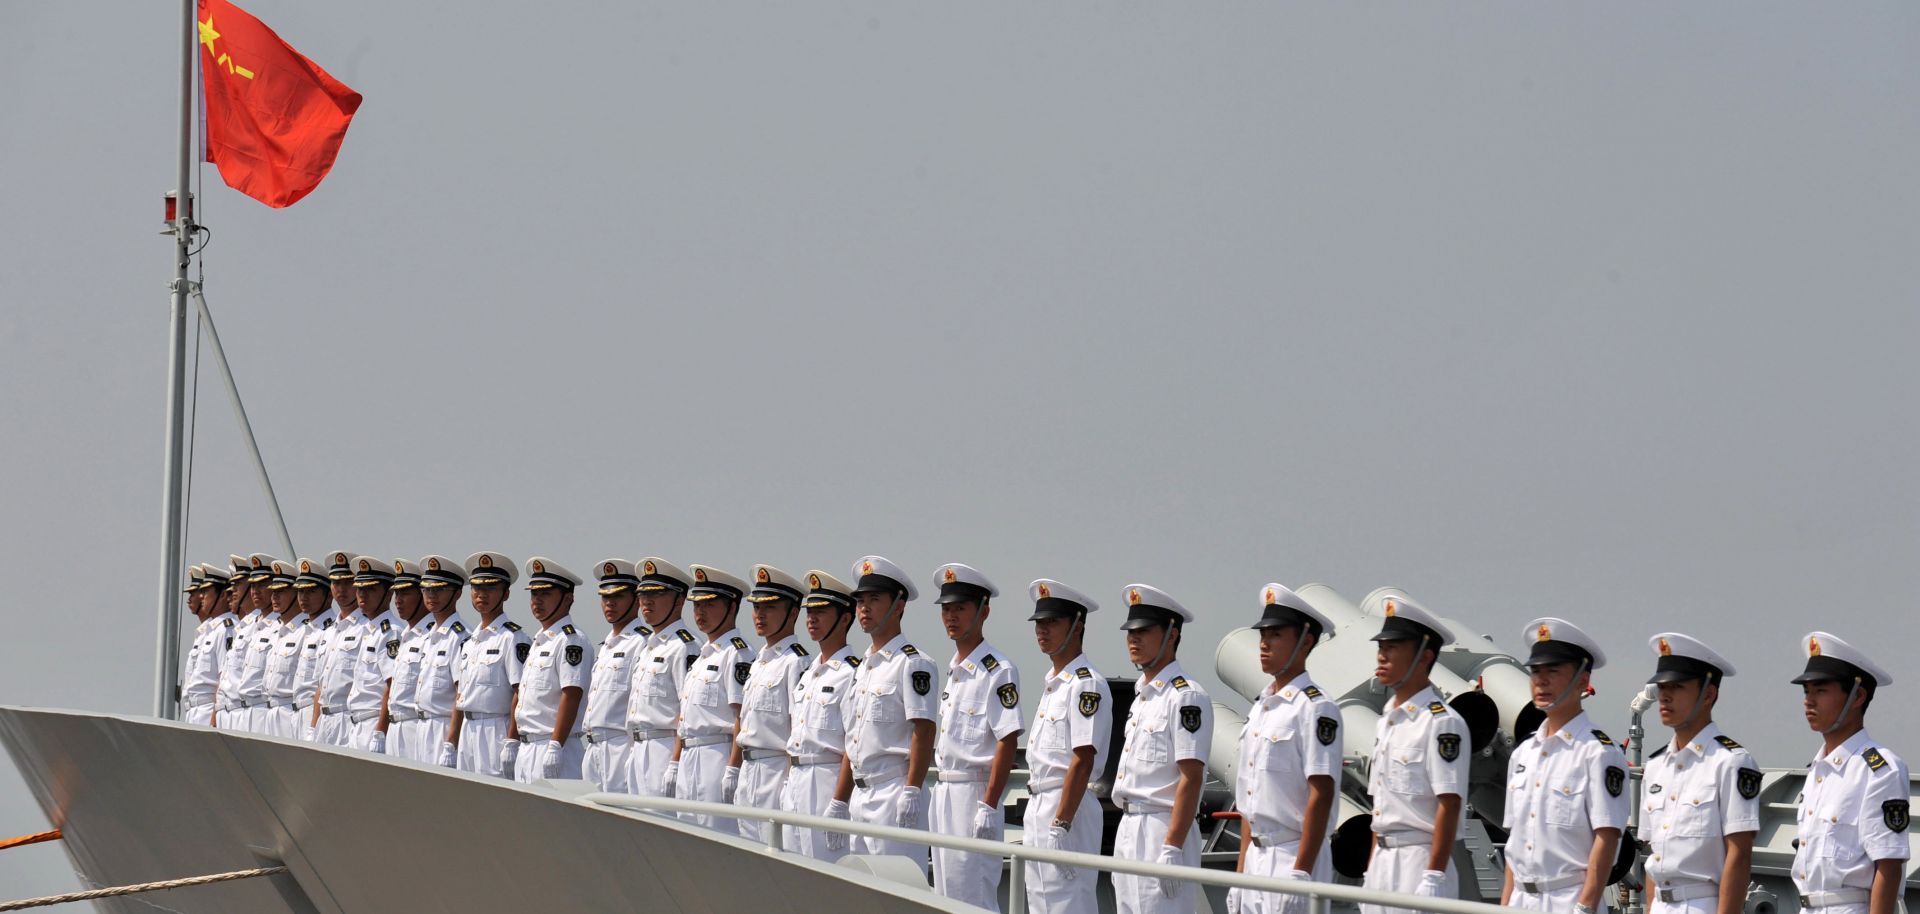 Members of the Chinese Navy stand at attention.